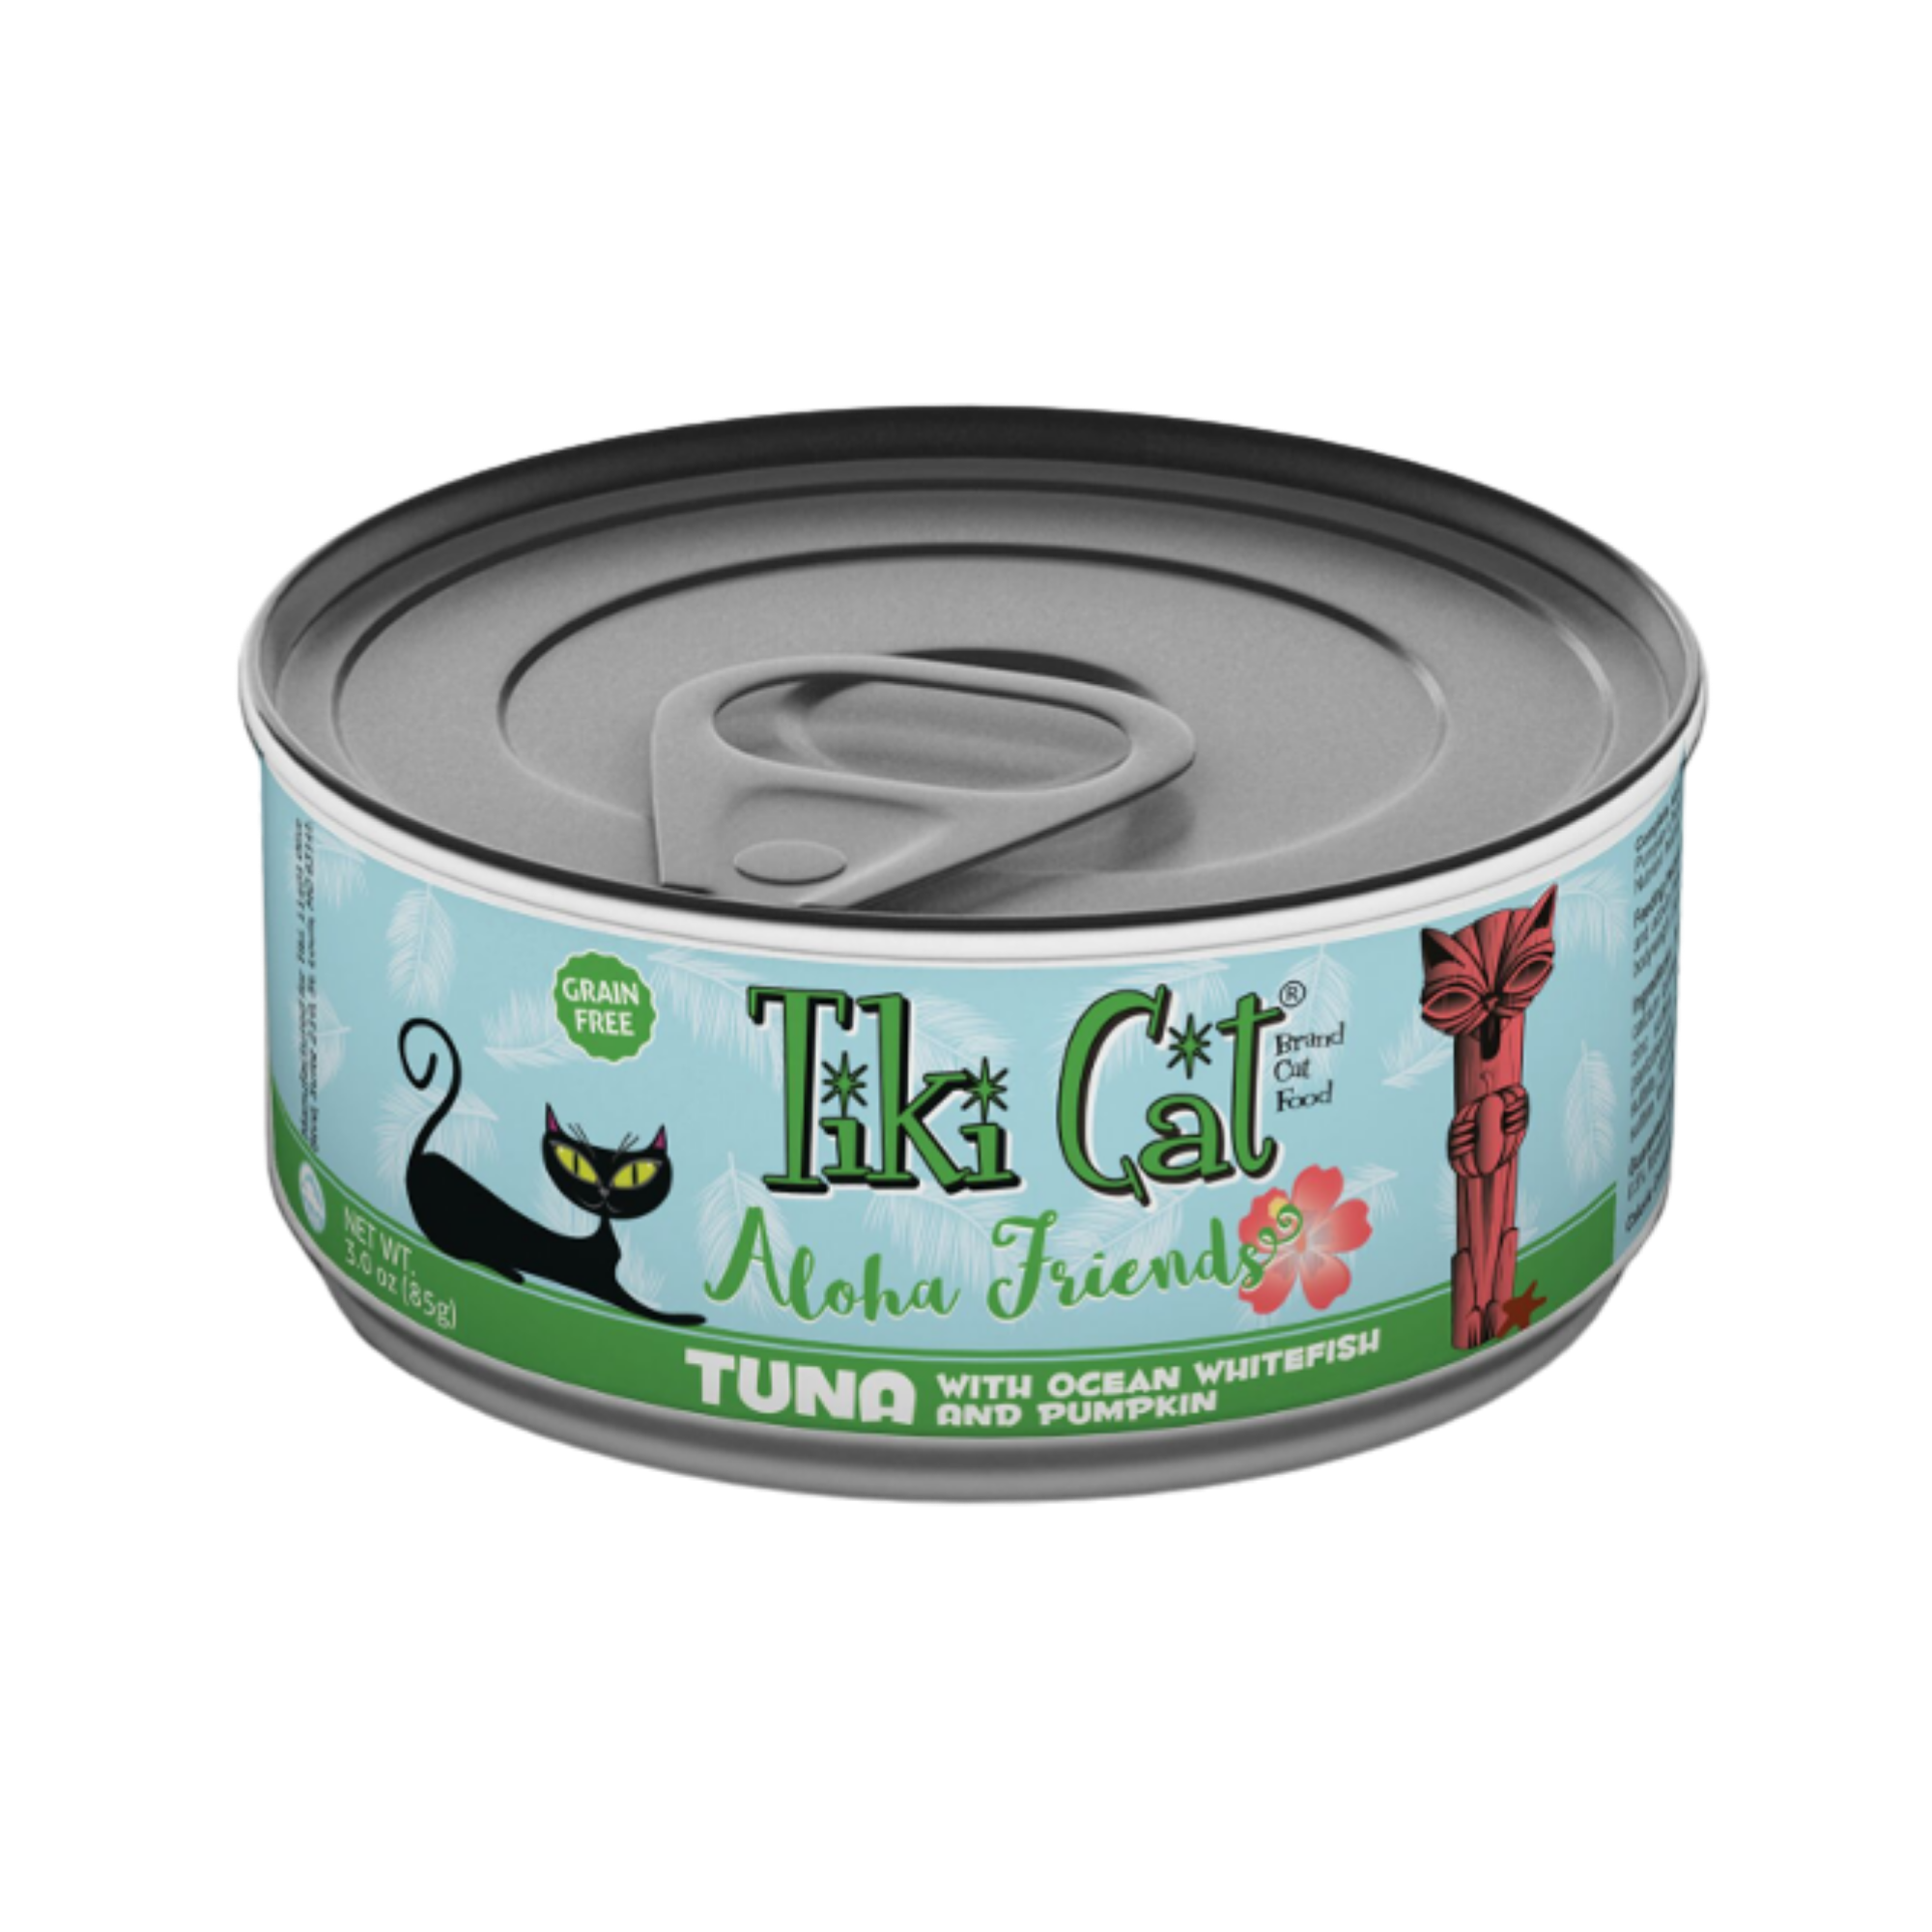 Tiki Cat Aloha Friends Tuna with Ocean Whitefish Canned Cat Food - Mutts & Co.